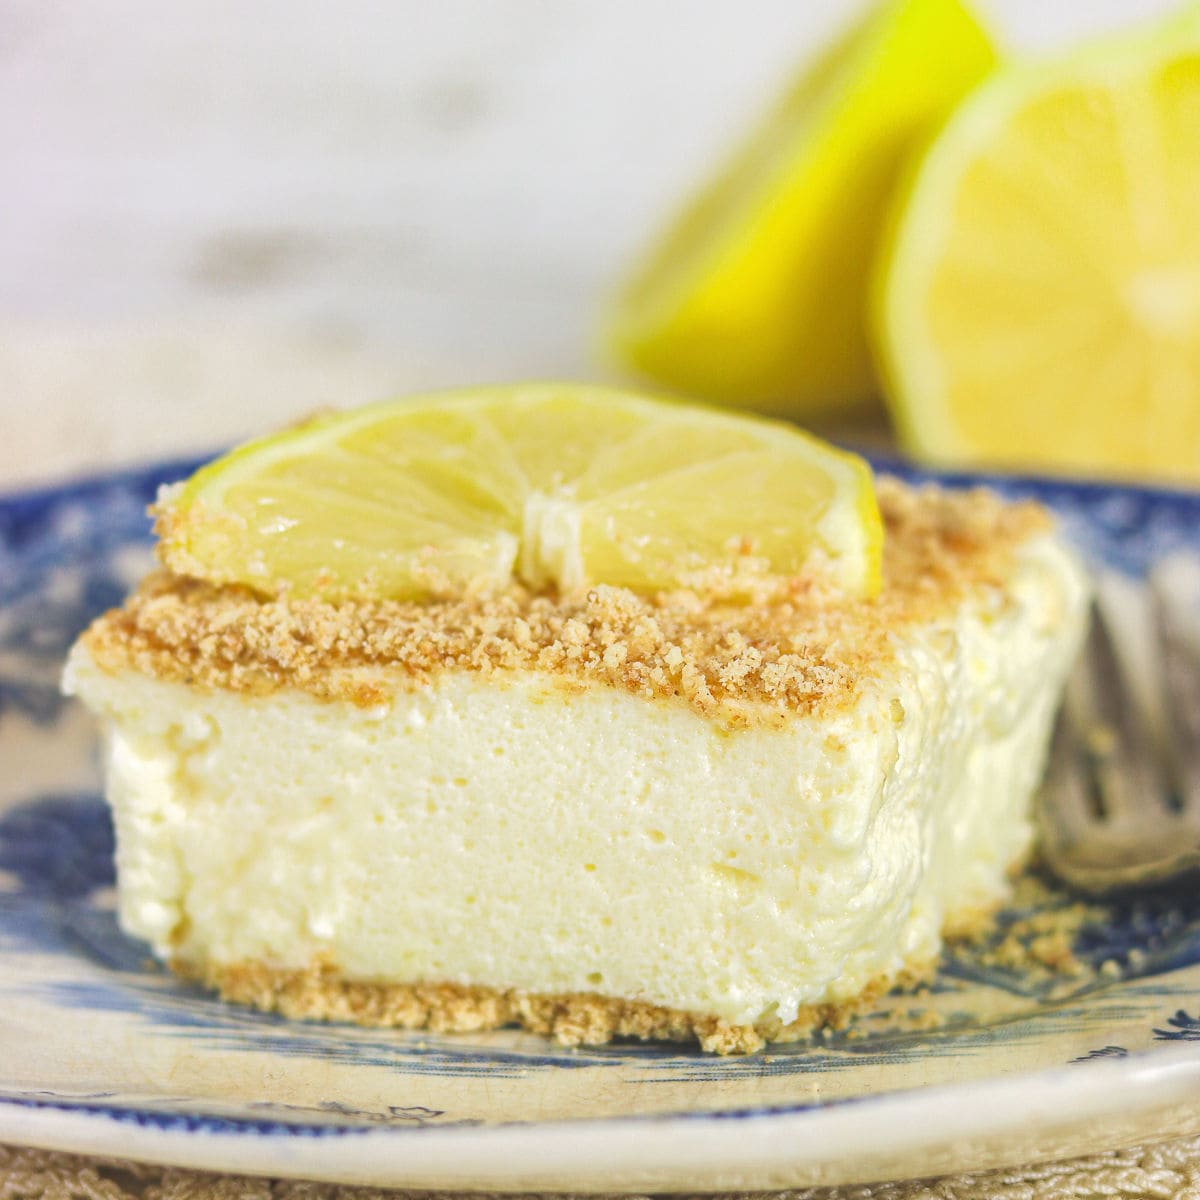 A square of lemon cheesecake on a flowered plate with a lemon slice on top.